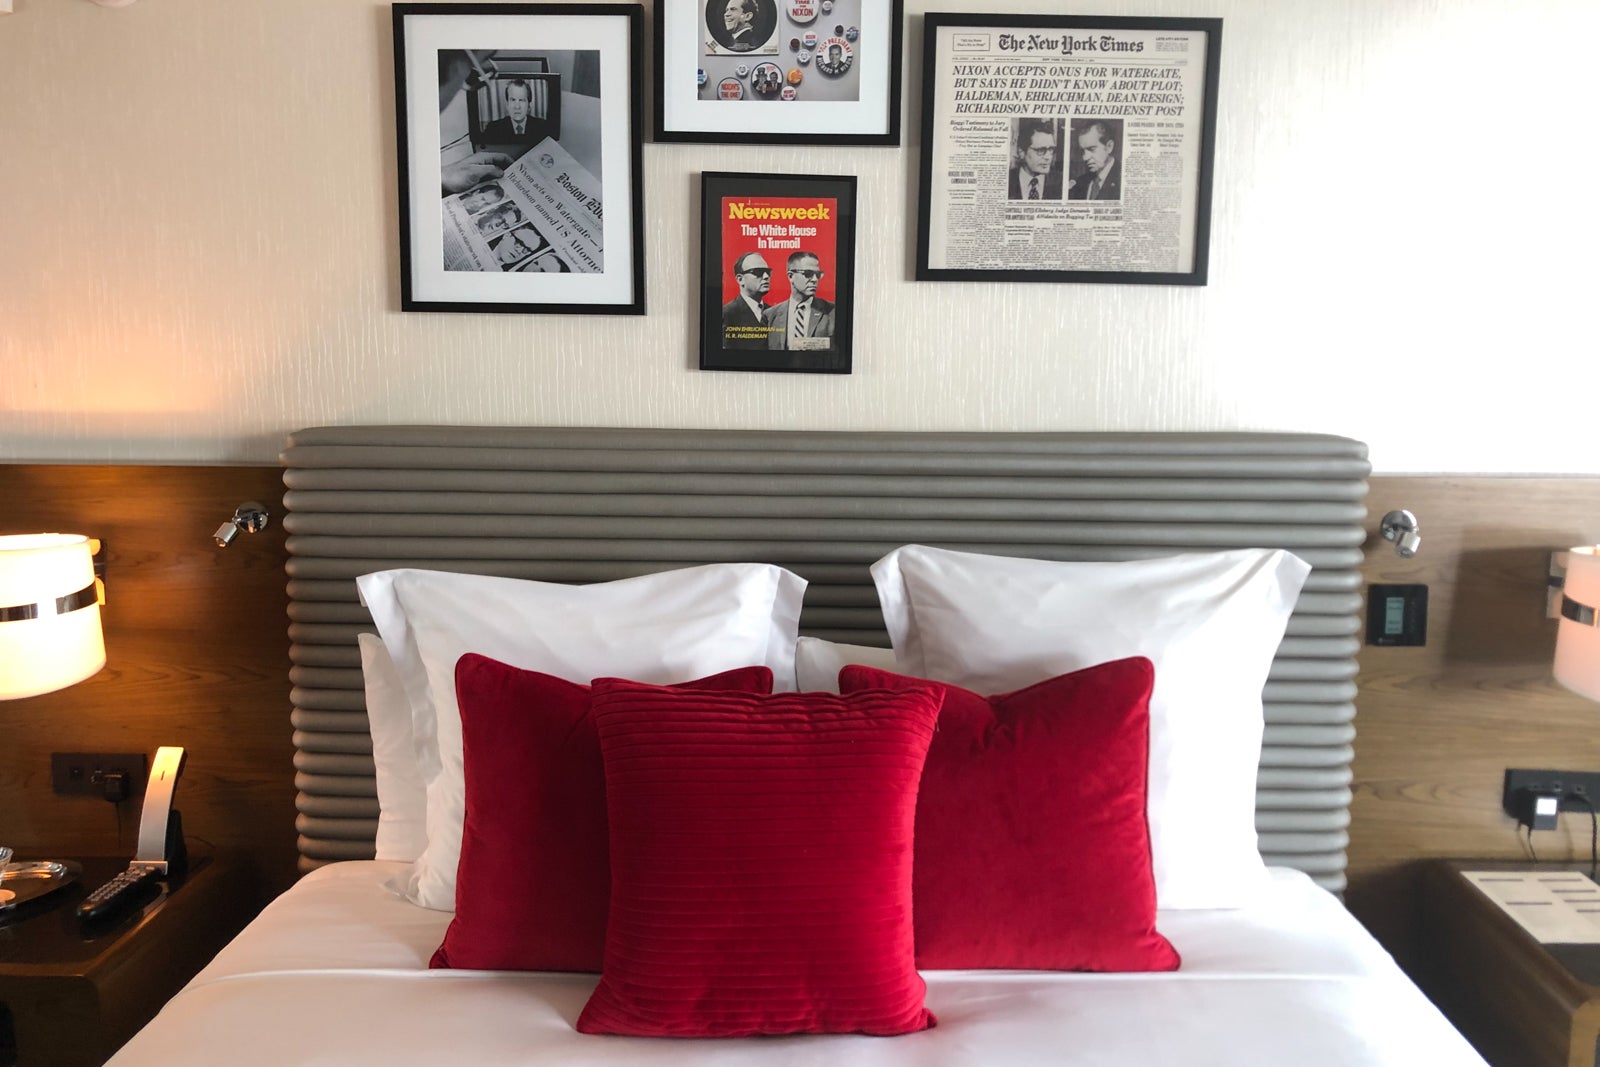 The clean lines of the gray headboard, the deep red velvet pillows on top of crisp white sheets and the Nixon-related art above the bed make the Scandal Room's sleeping area cozy yet period-appropriate.